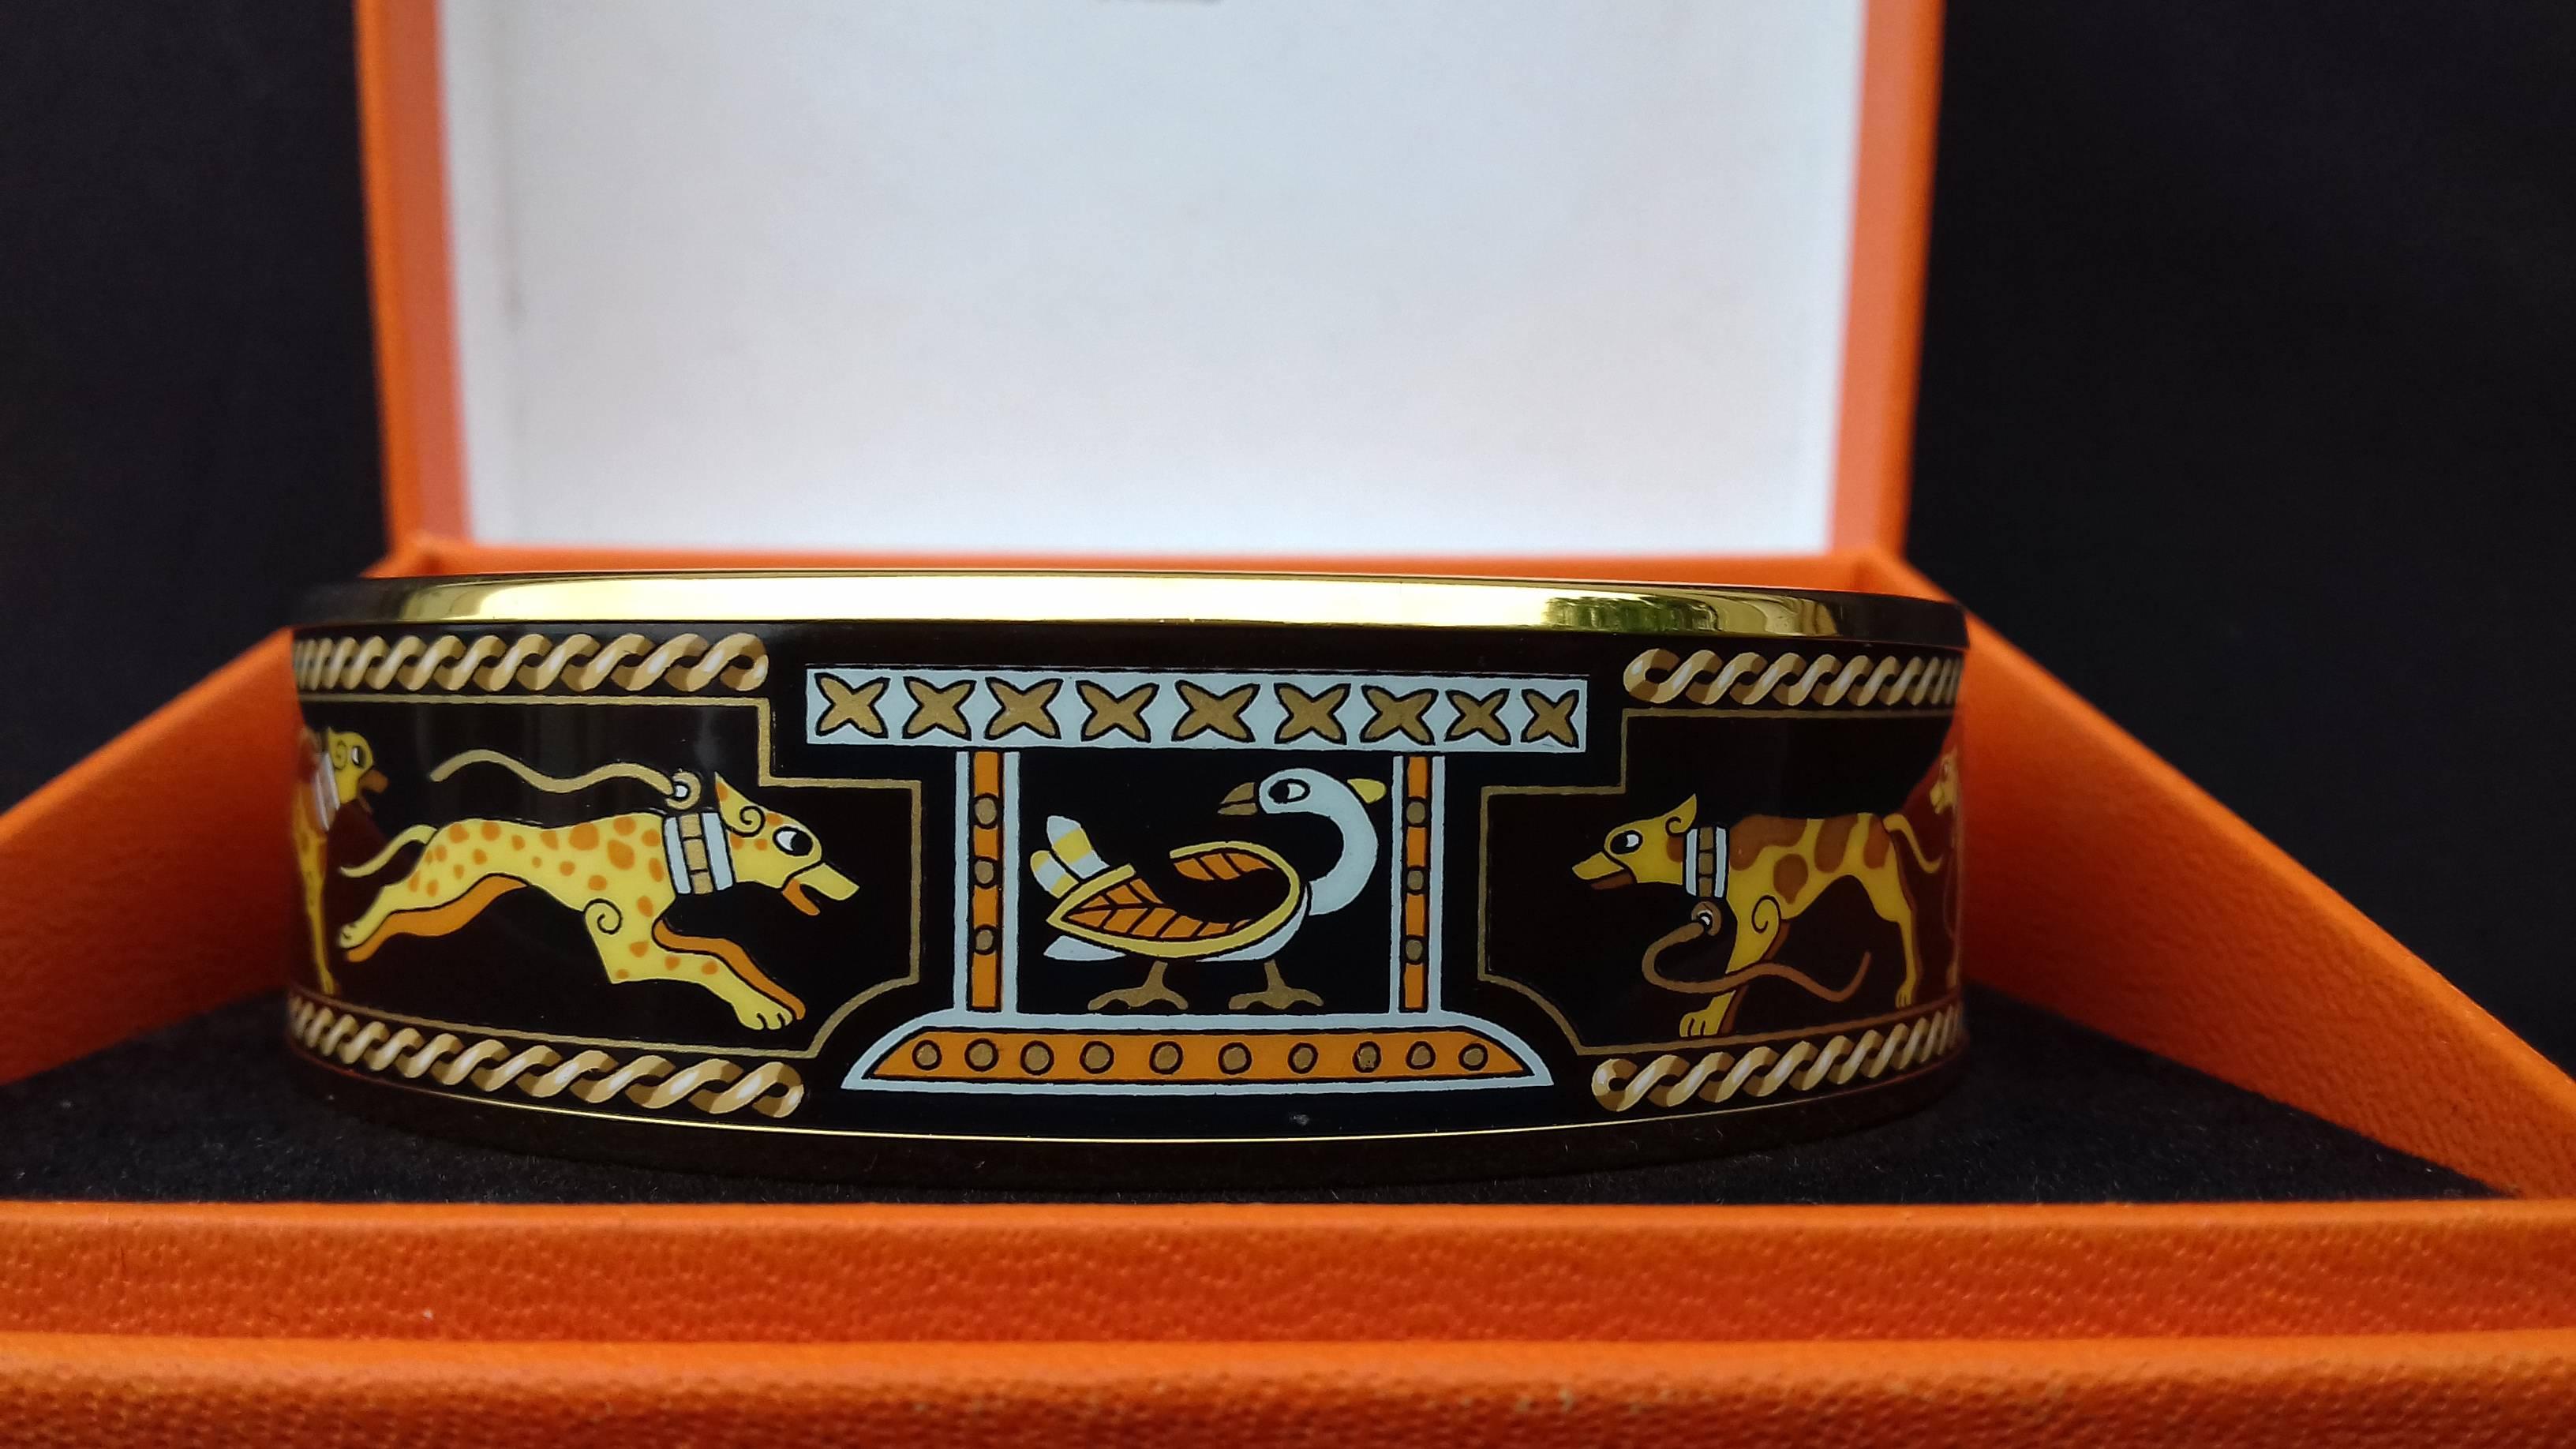 So Beautiful and Hard to Find Authentic Hermès Bracelet

Pattern: Lévriers (Greyhound dogs)

Made in Austria

Stamp A

Made of Enamel and Gold plated Hardware

Colorways: Black, Yellow, Brown

The leashes and the interlacing decoration are in